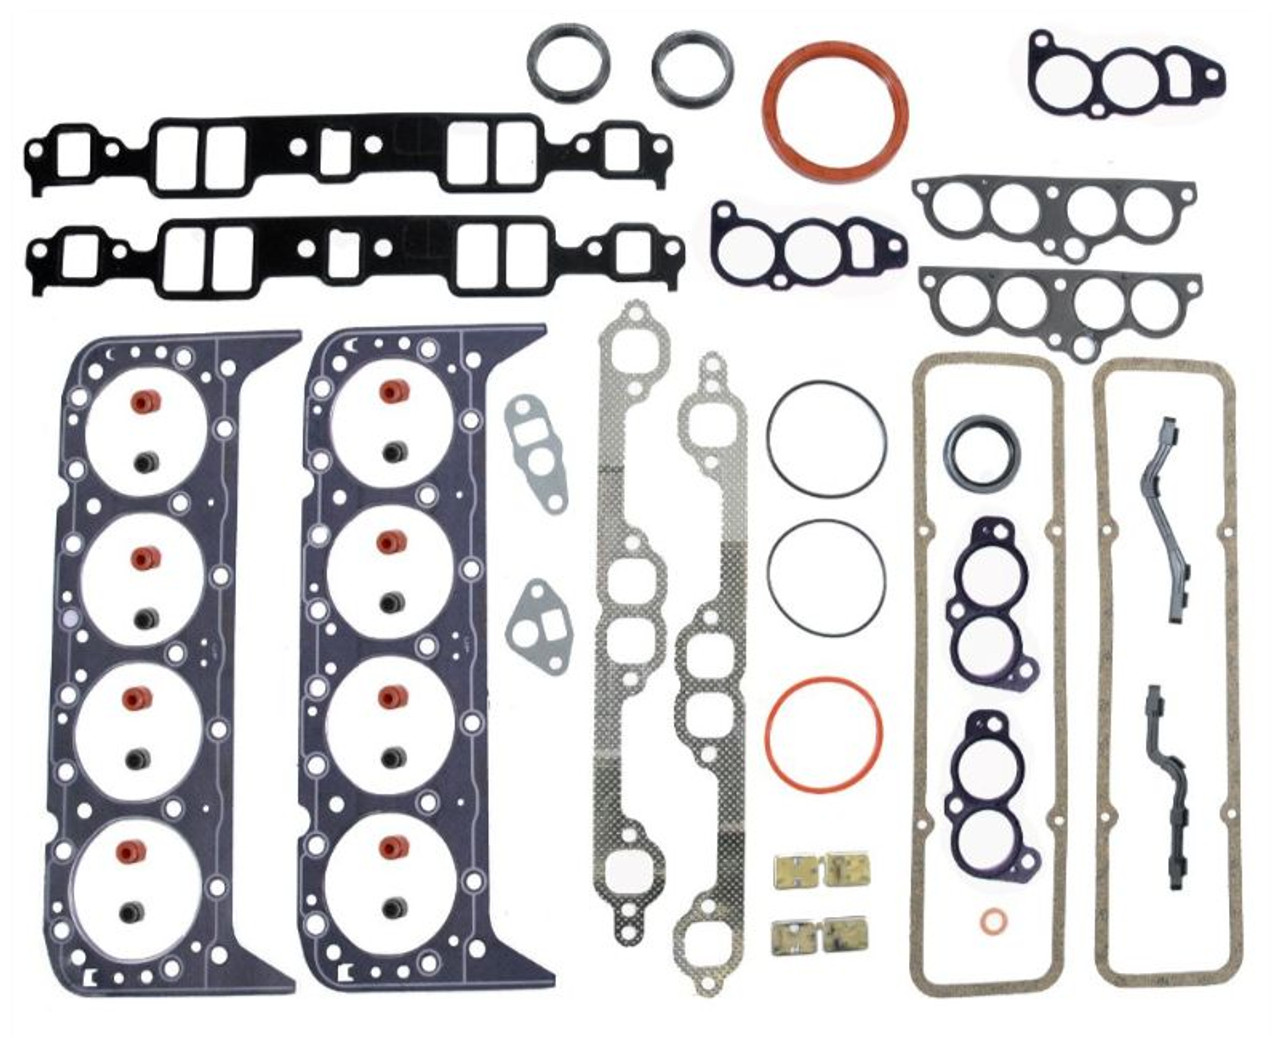 1991 Buick Commercial Chassis 5.0L Engine Gasket Set C305LM-25 -129